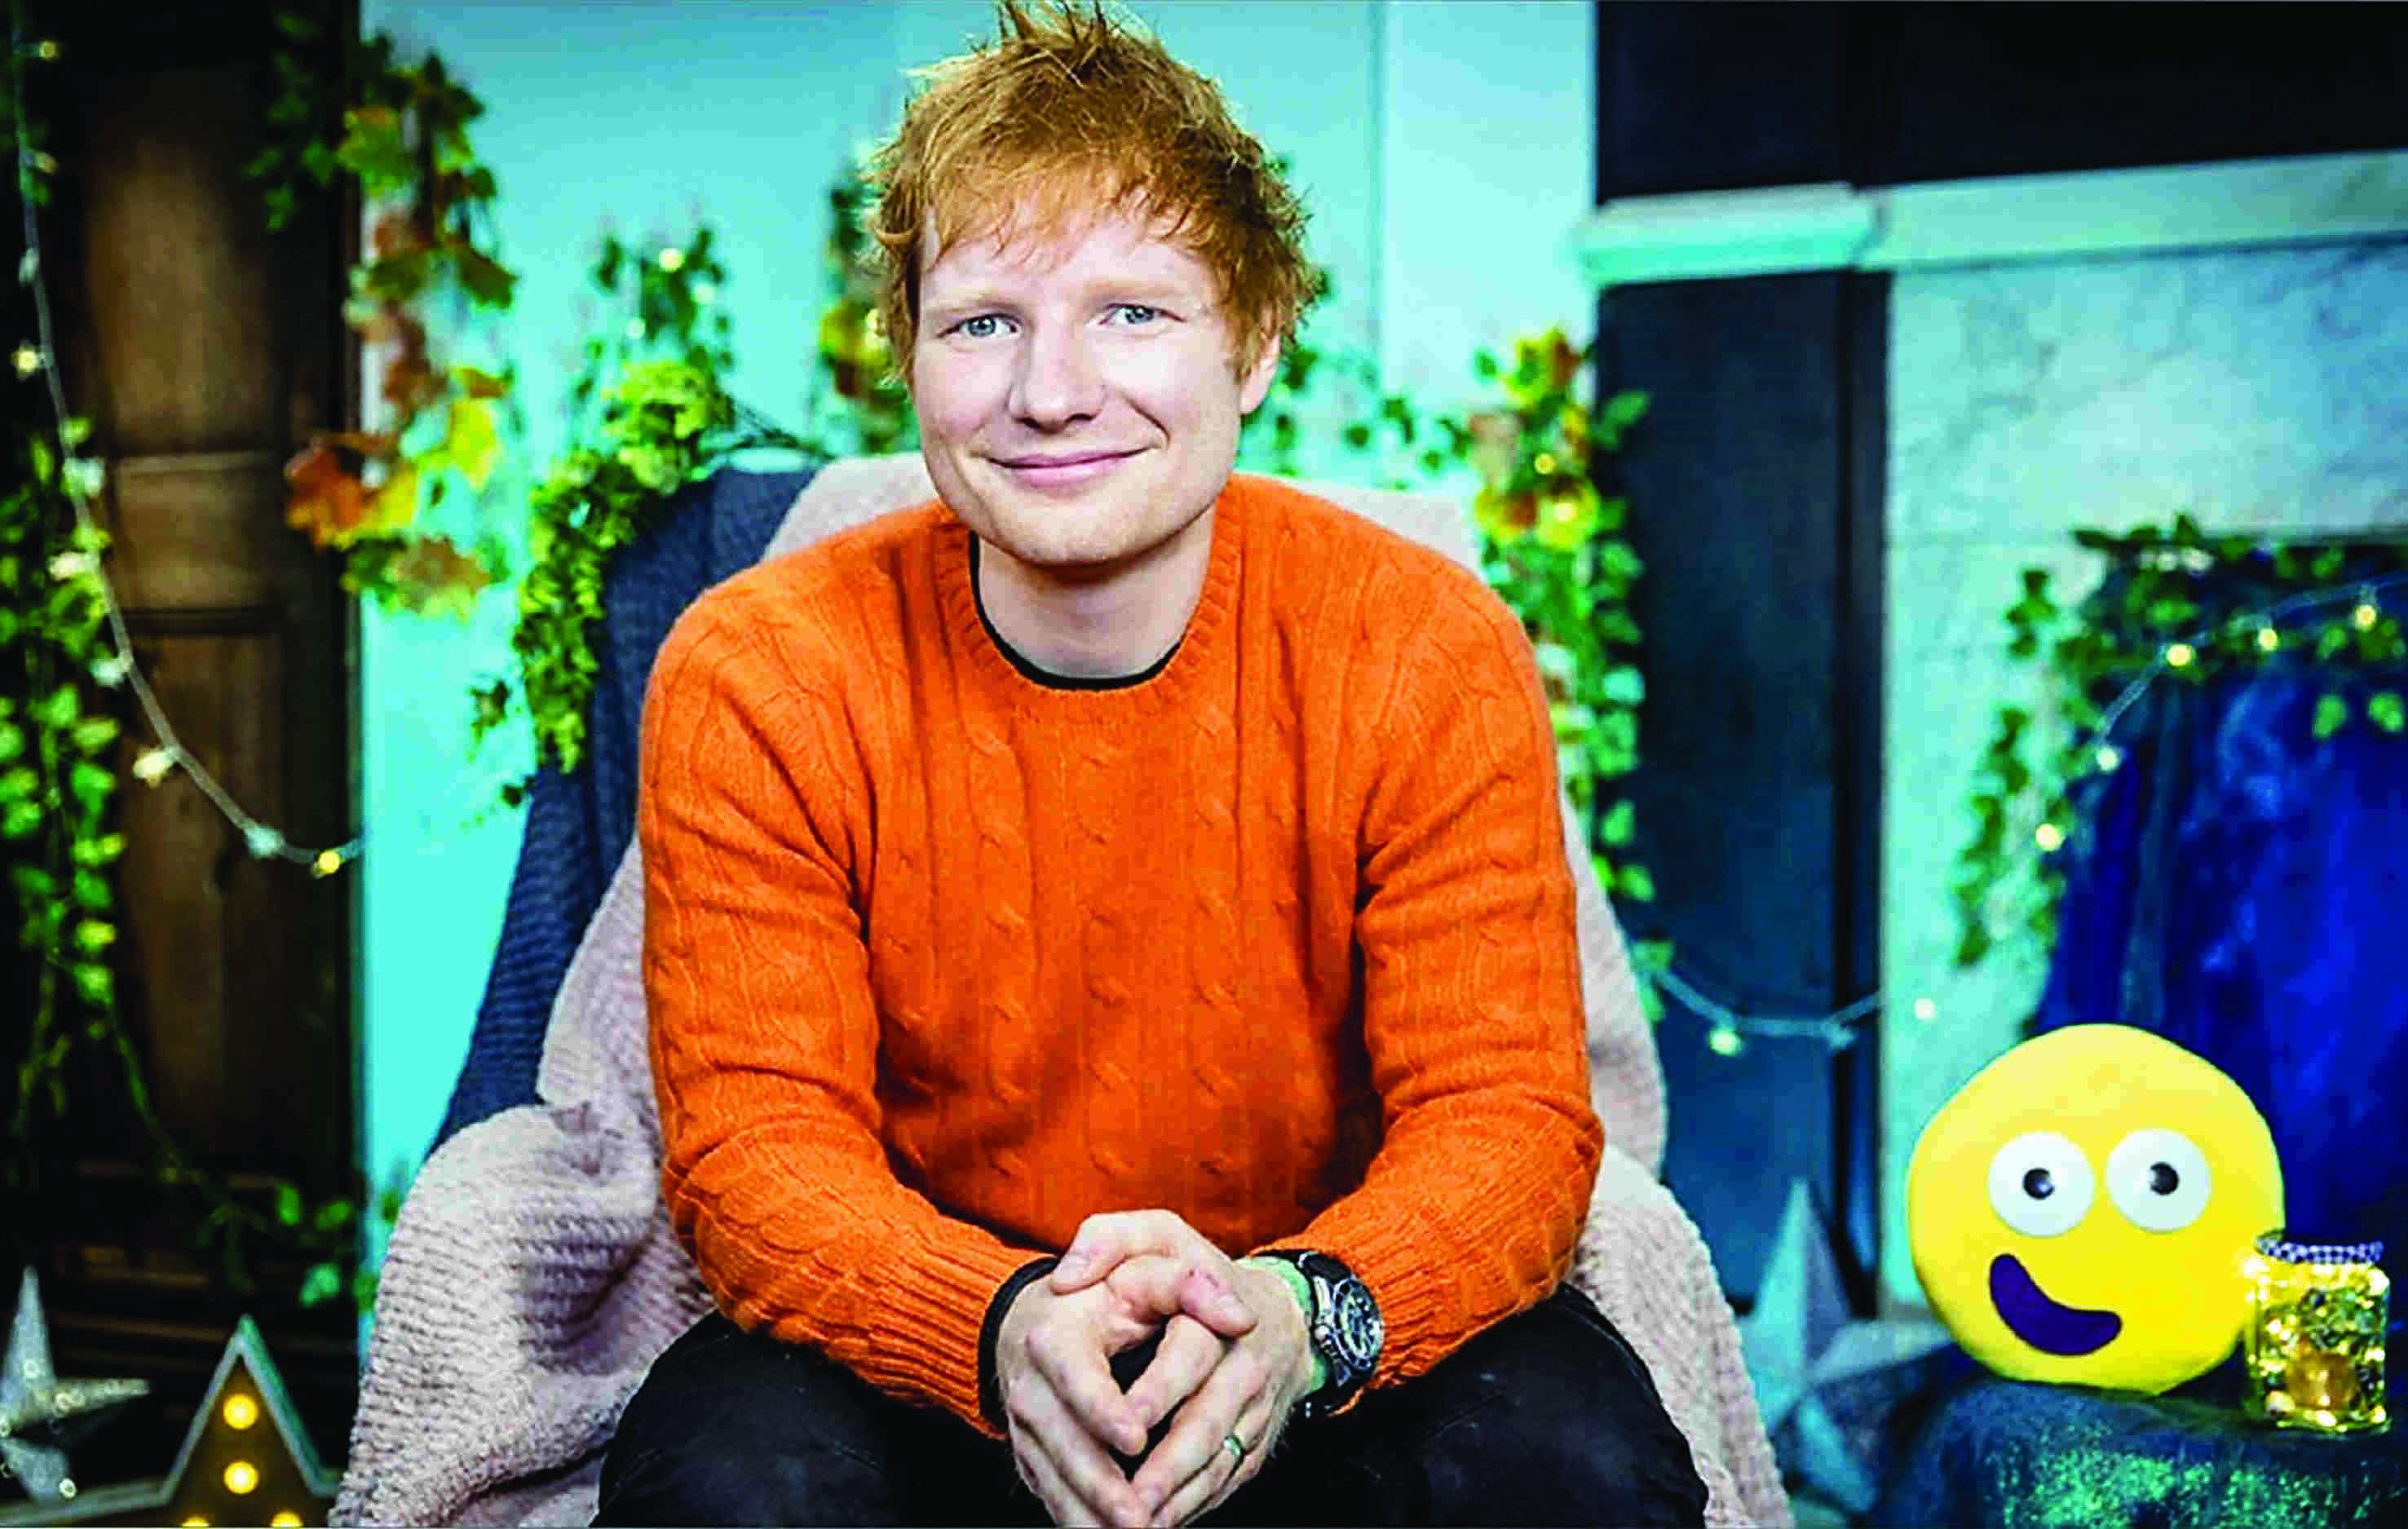 Ed denies borrowing Shape of You lines in a copyright trial